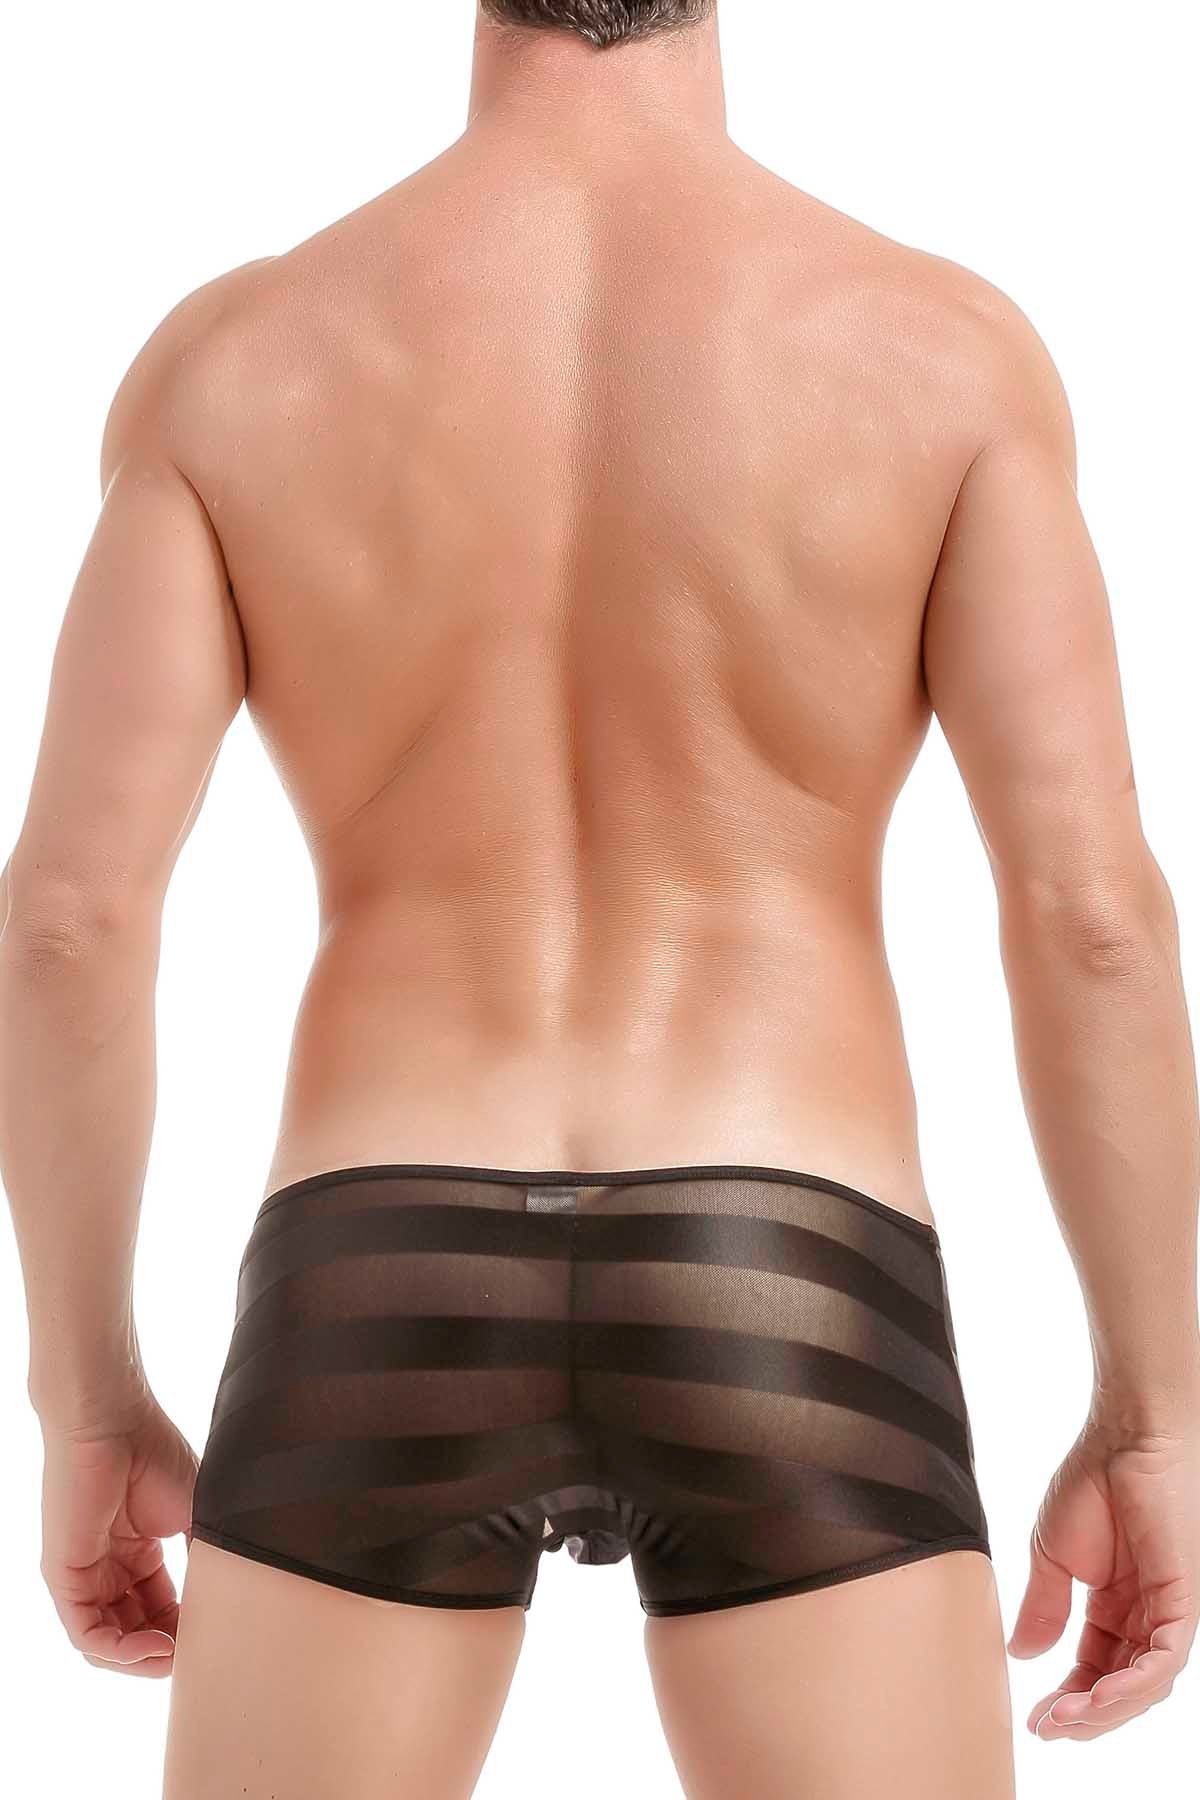 PetitQ Black Jaily Fly Boxer Brief